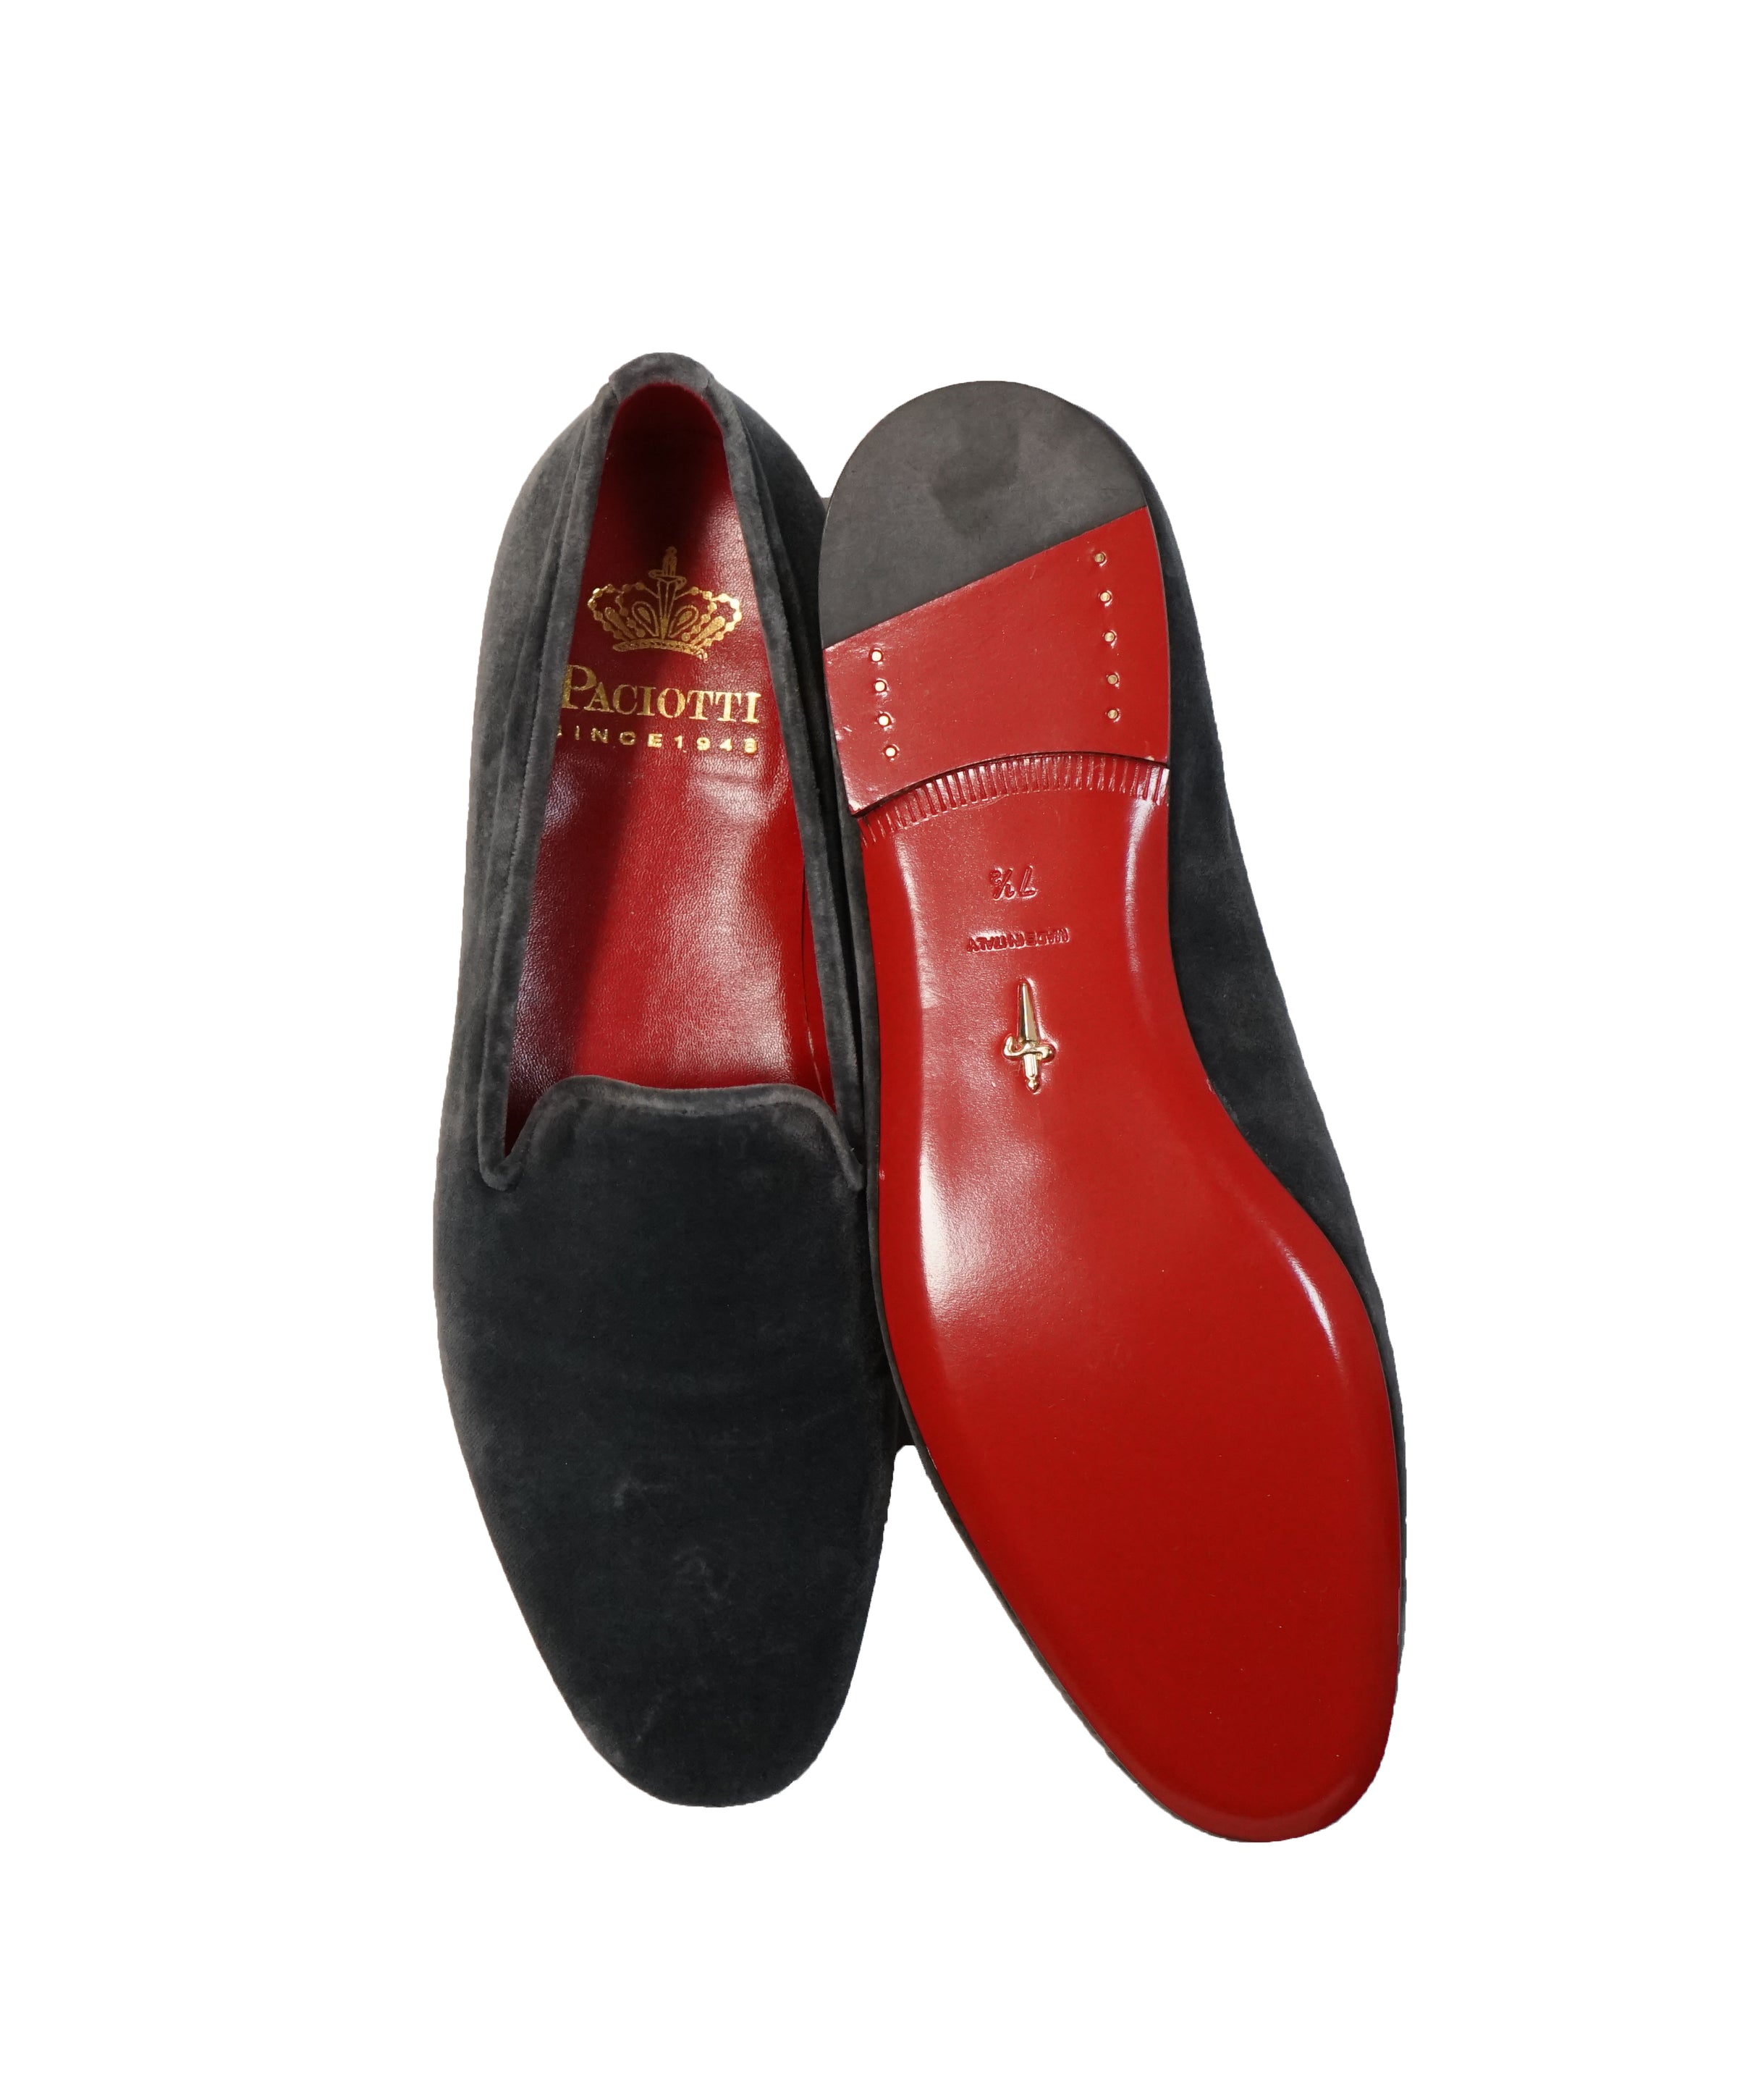 CESARE PACIOTTI - Gray Velvet Smoking Slippers Loafers RED SOLE - 8.5 –  Luxe Hanger